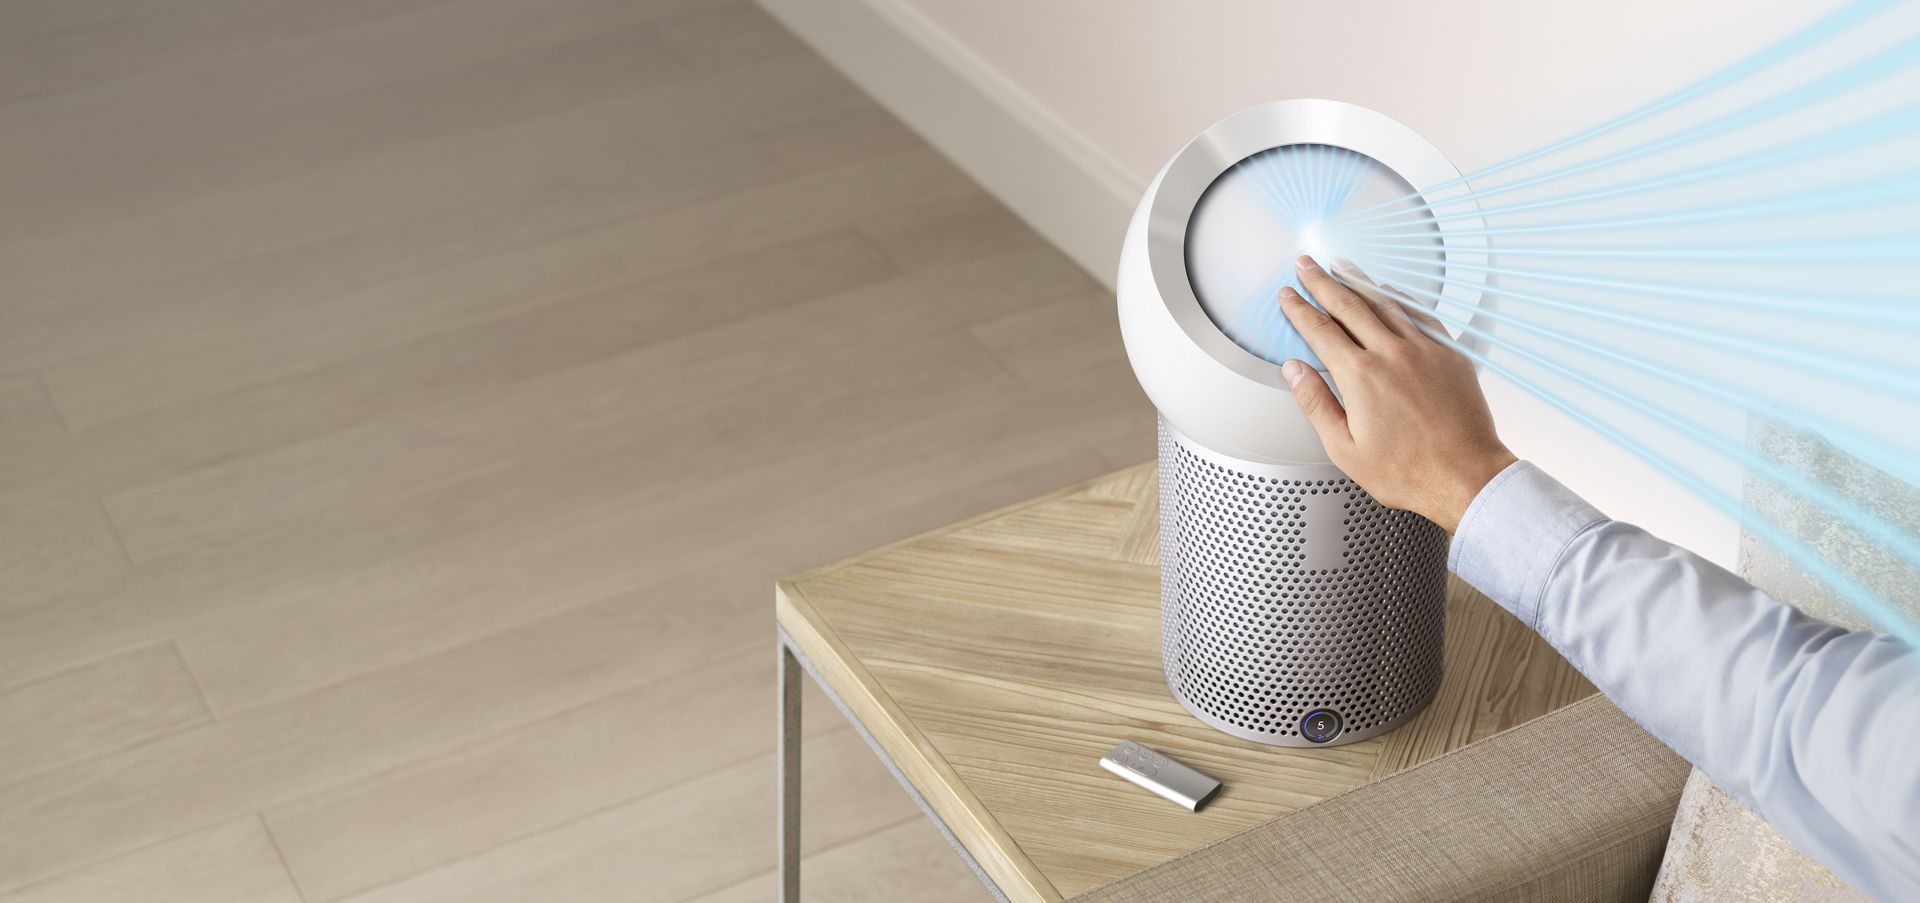 Hand reaching out to refocus airflow with Dyson Core Flow technology